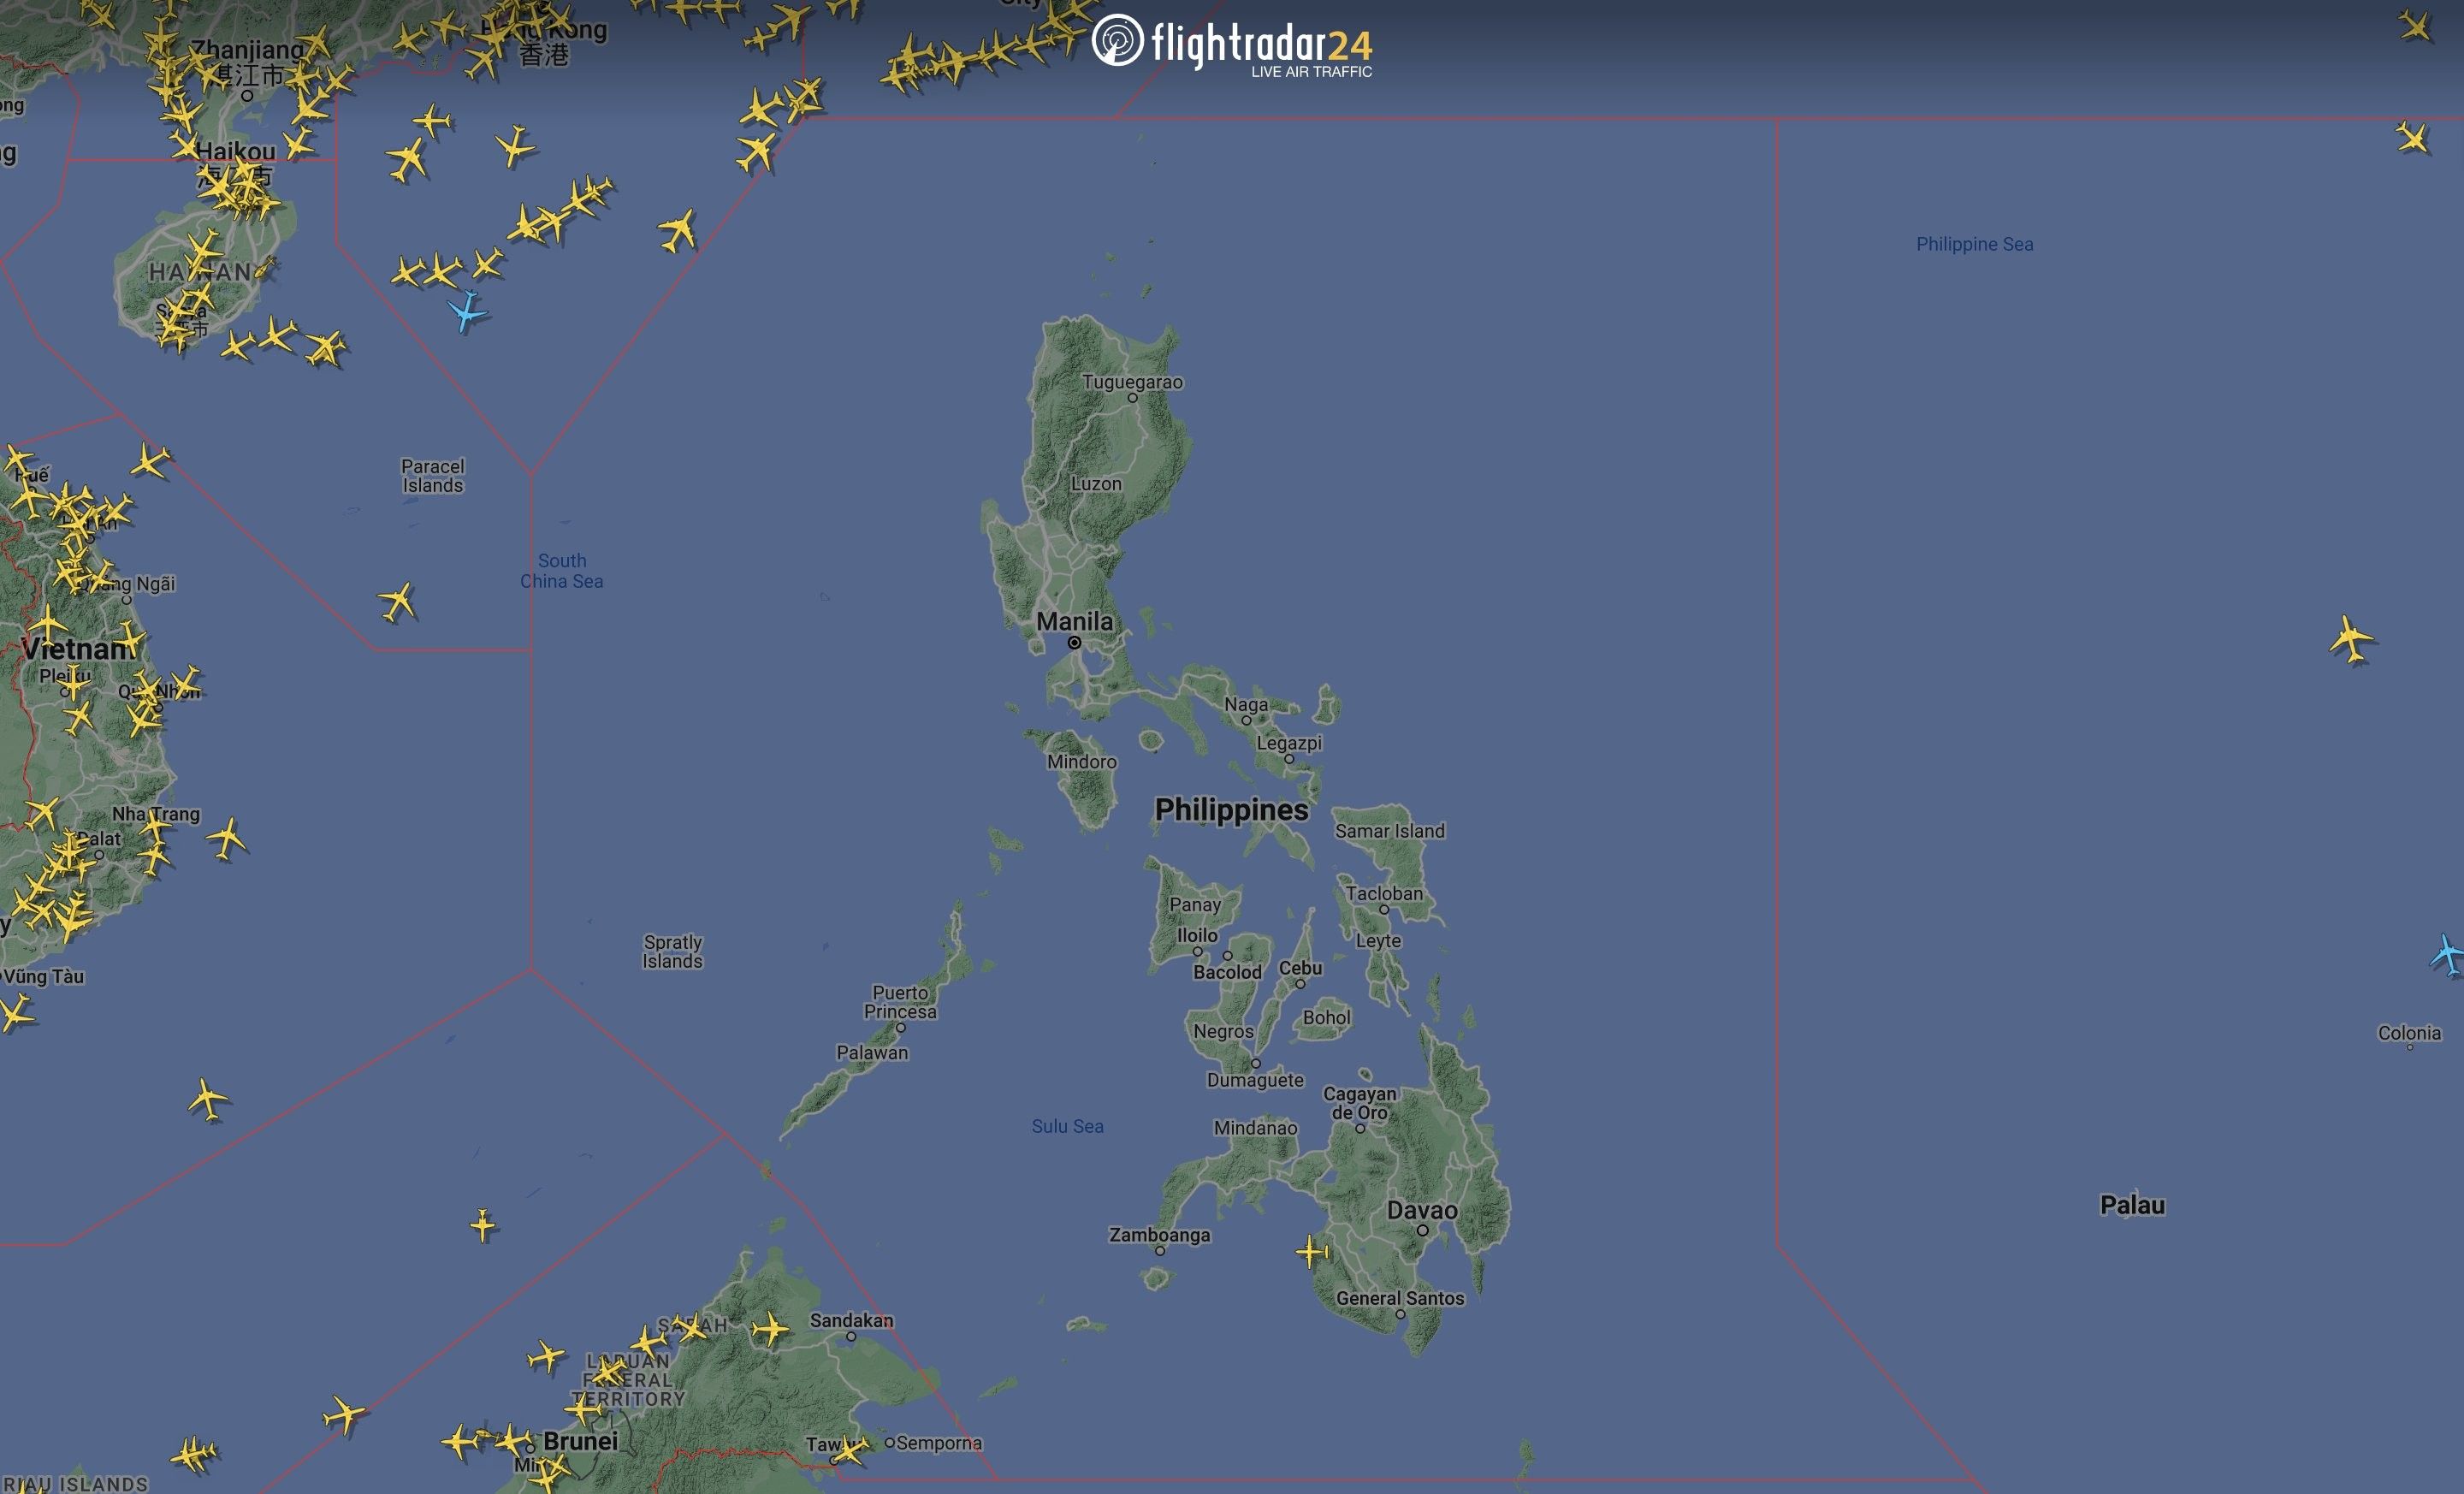 Manila flights still â��on holdâ�� as authorities iron out navigation issues